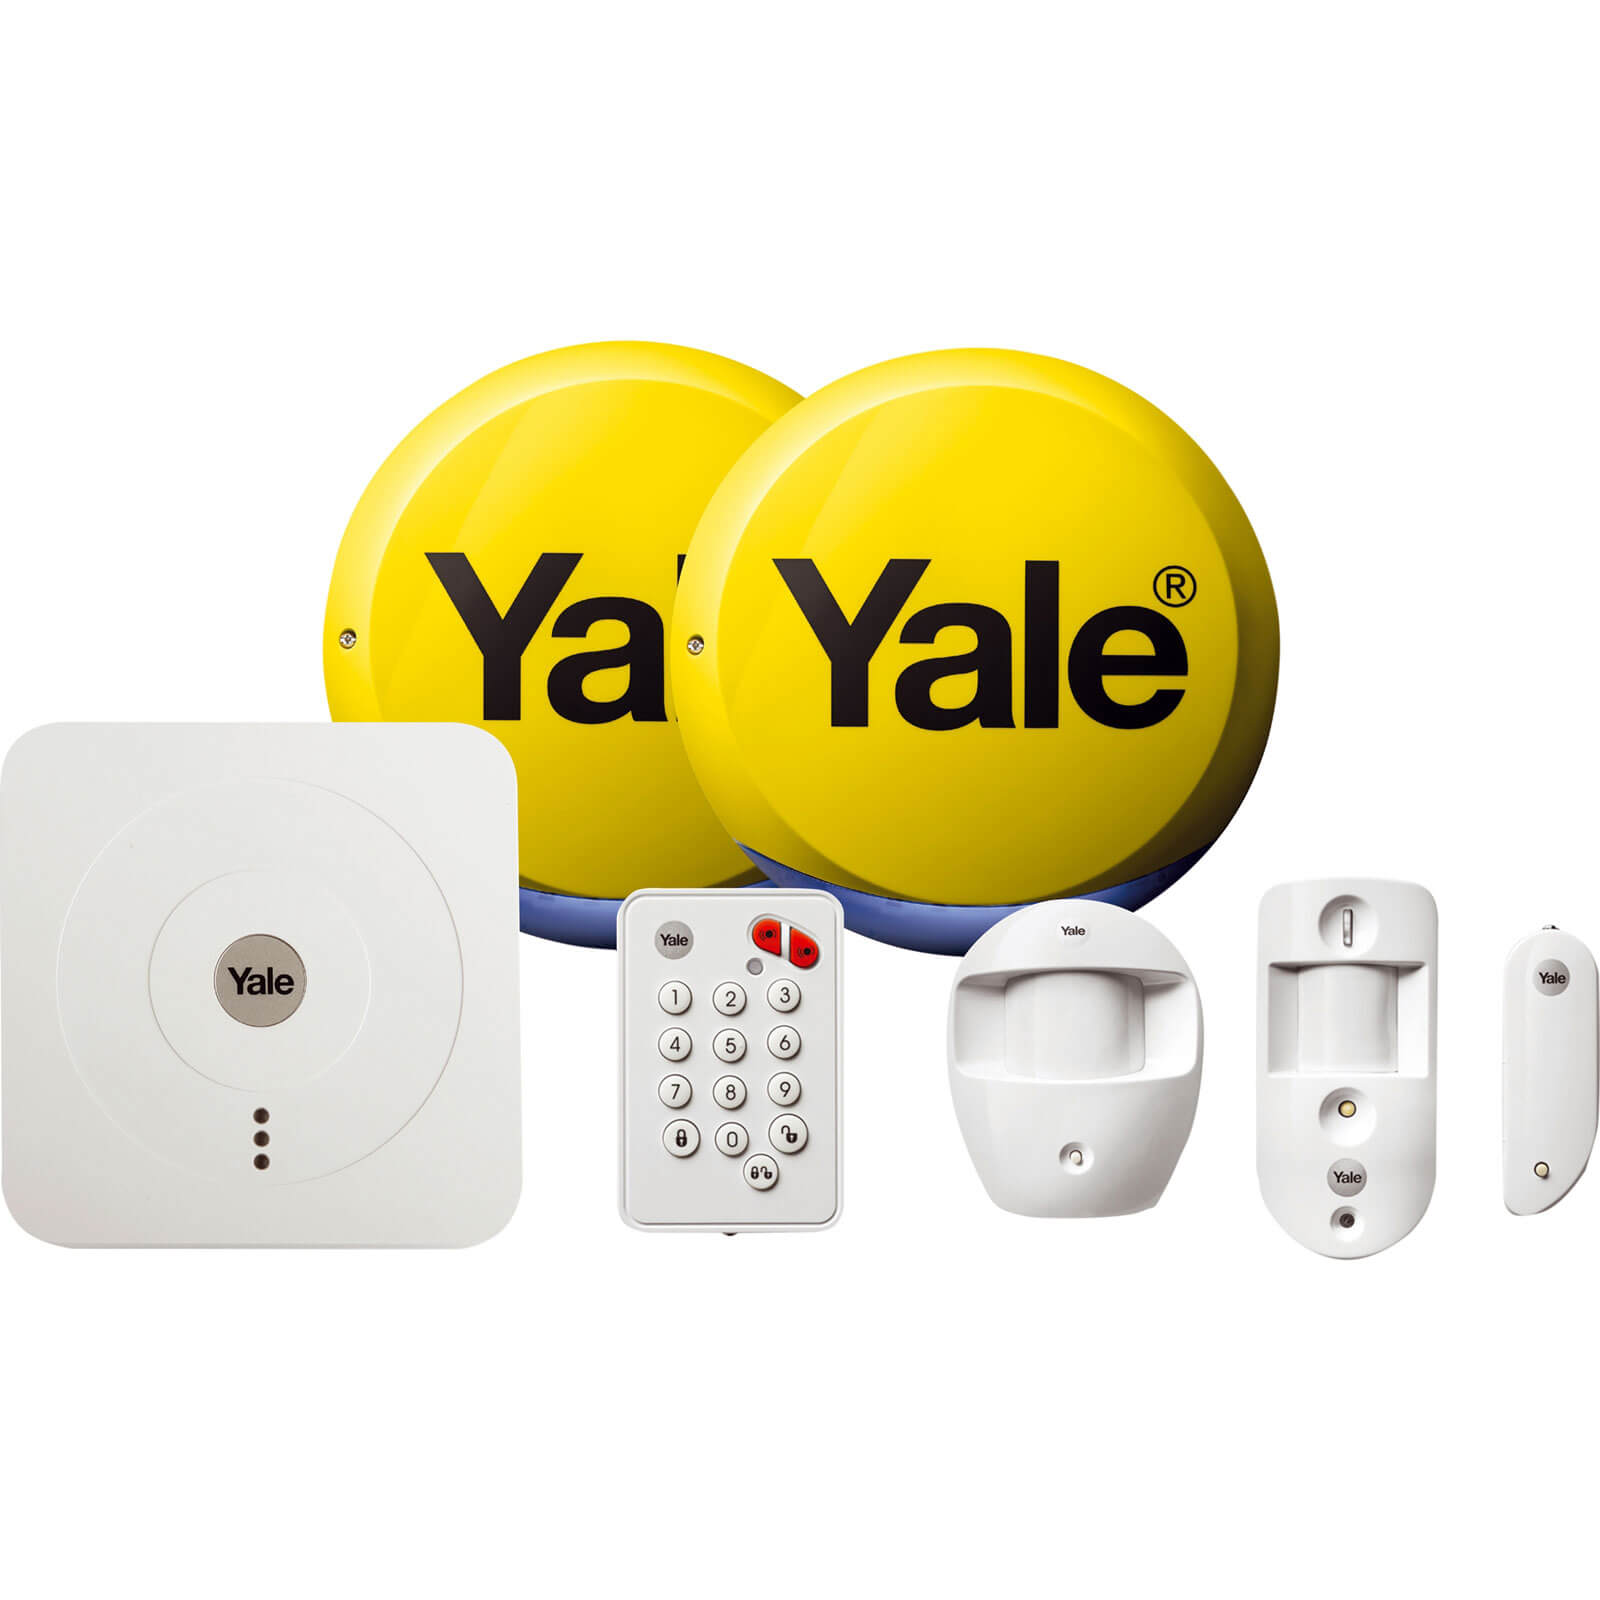 Image of Yale Alarms Sr-330 Smart Home Alarm and View Kit